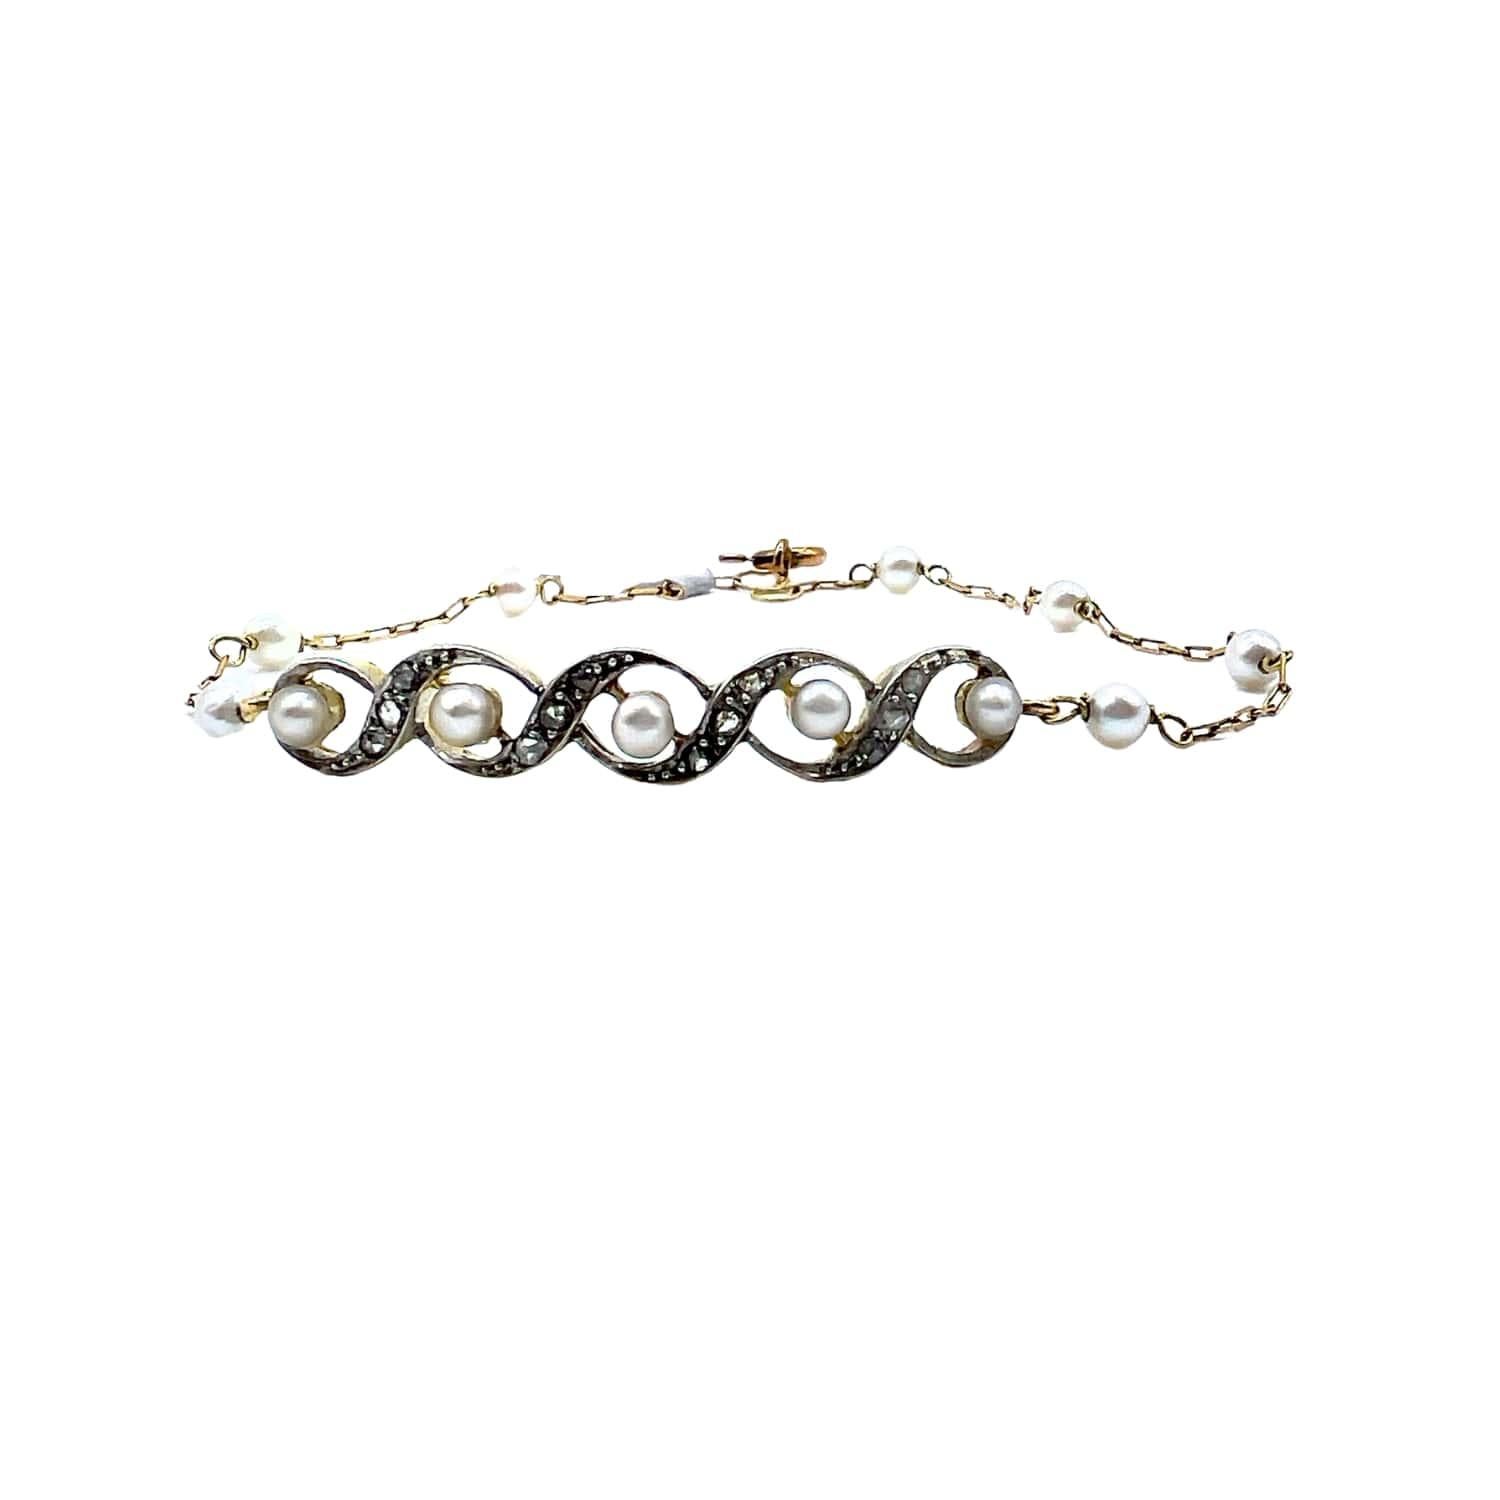 Elevate your ensemble with this exquisite bracelet boasting an Art Deco style from 1935. Crafted in 18k yellow gold and platinum 950 kts, it features a lustrous pearl and sparkling diamonds. The rose-cut or rough-cut diamonds total 0.12 carats with